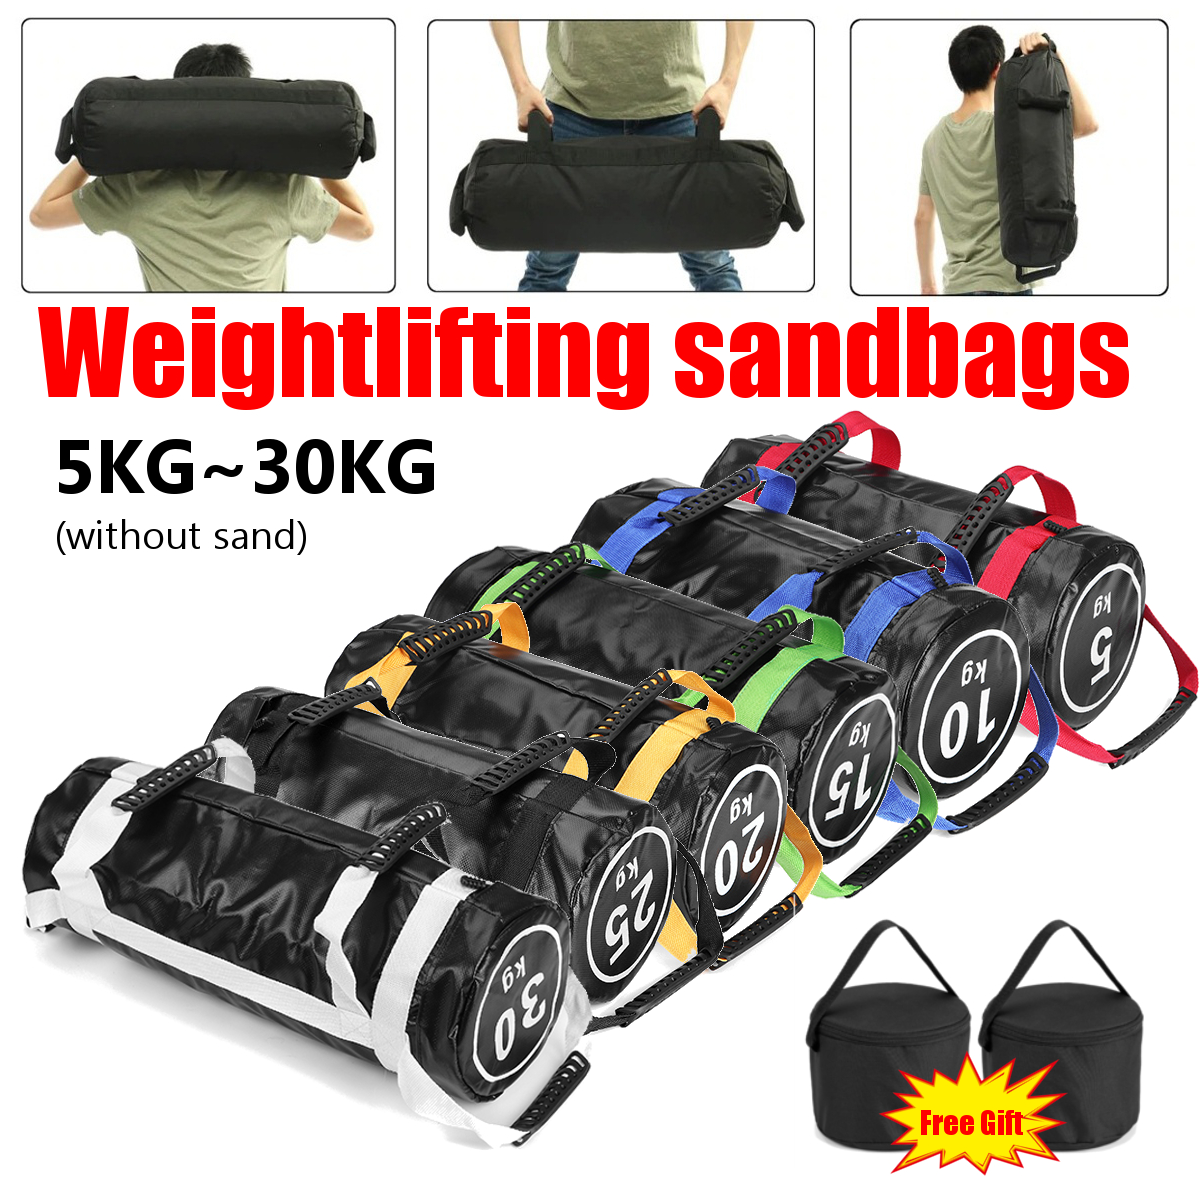 515202530-kg-Filled-Weight-Sand-Power-Bag-Strength-Training-Body-Building-Fitness-Boxing-Exercise-Sa-1697385-2